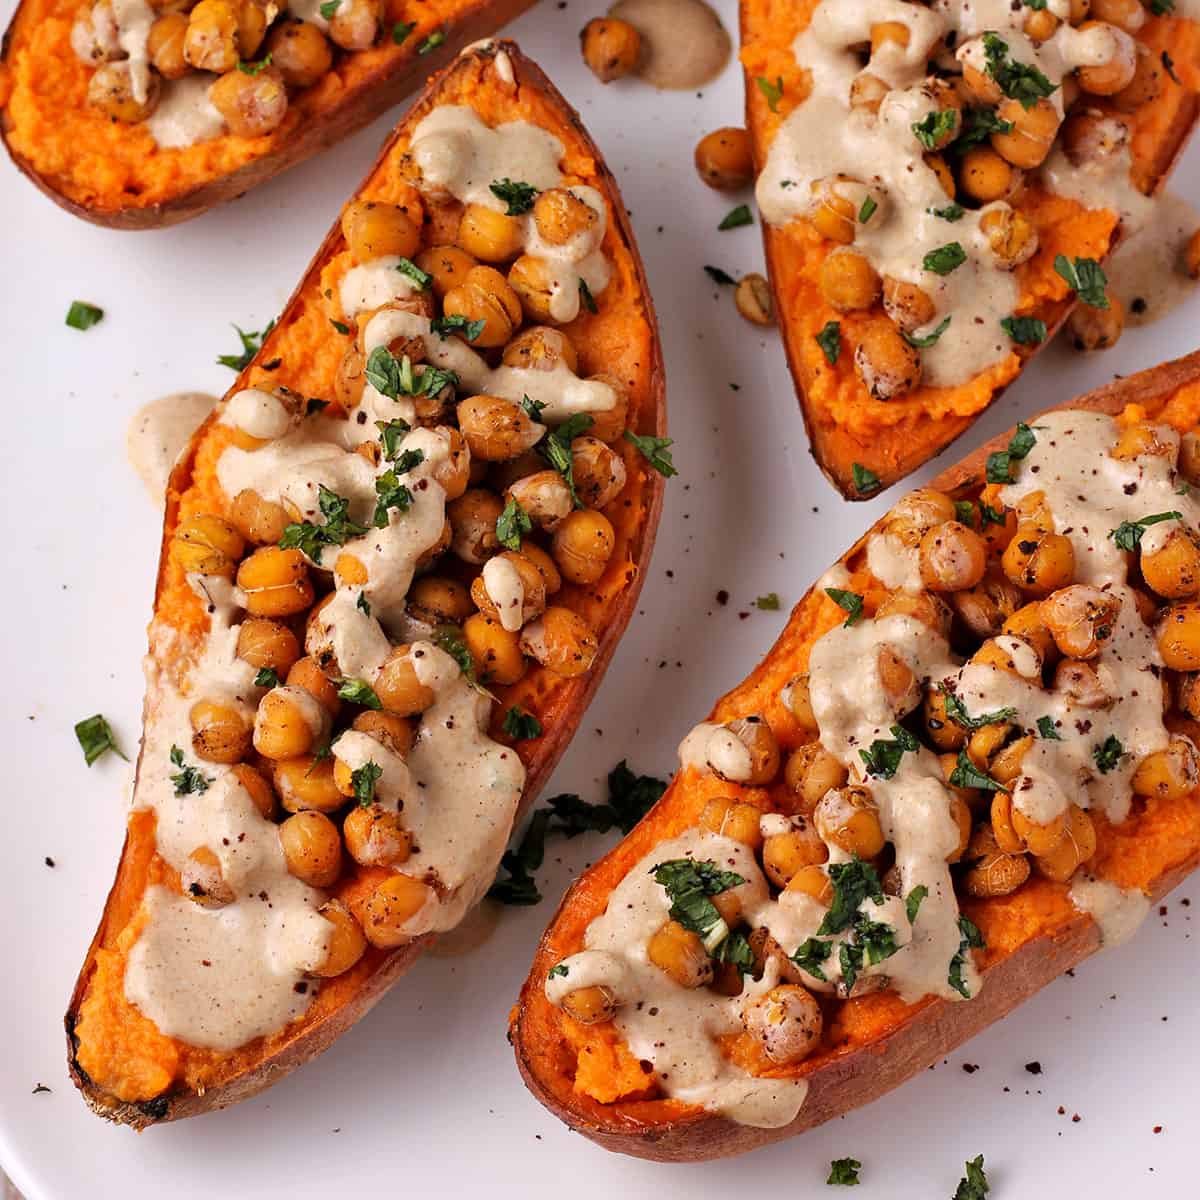 Baked sweet potatoes are cut in half and topped with baked chickpeas, dressing and chopped green mint.